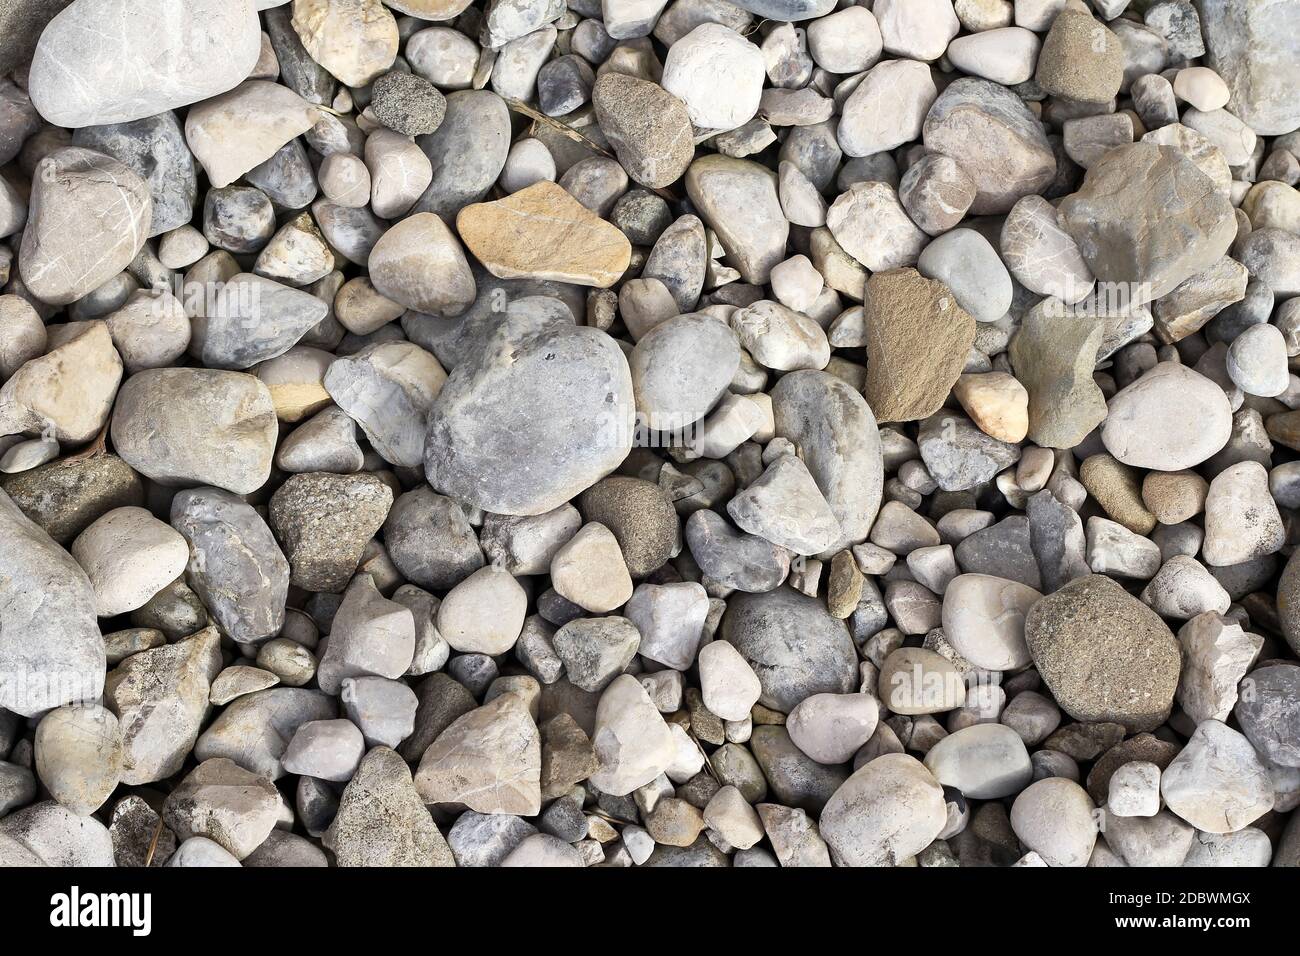 Background image with grey and beige stones and pebbles on the floor Stock Photo